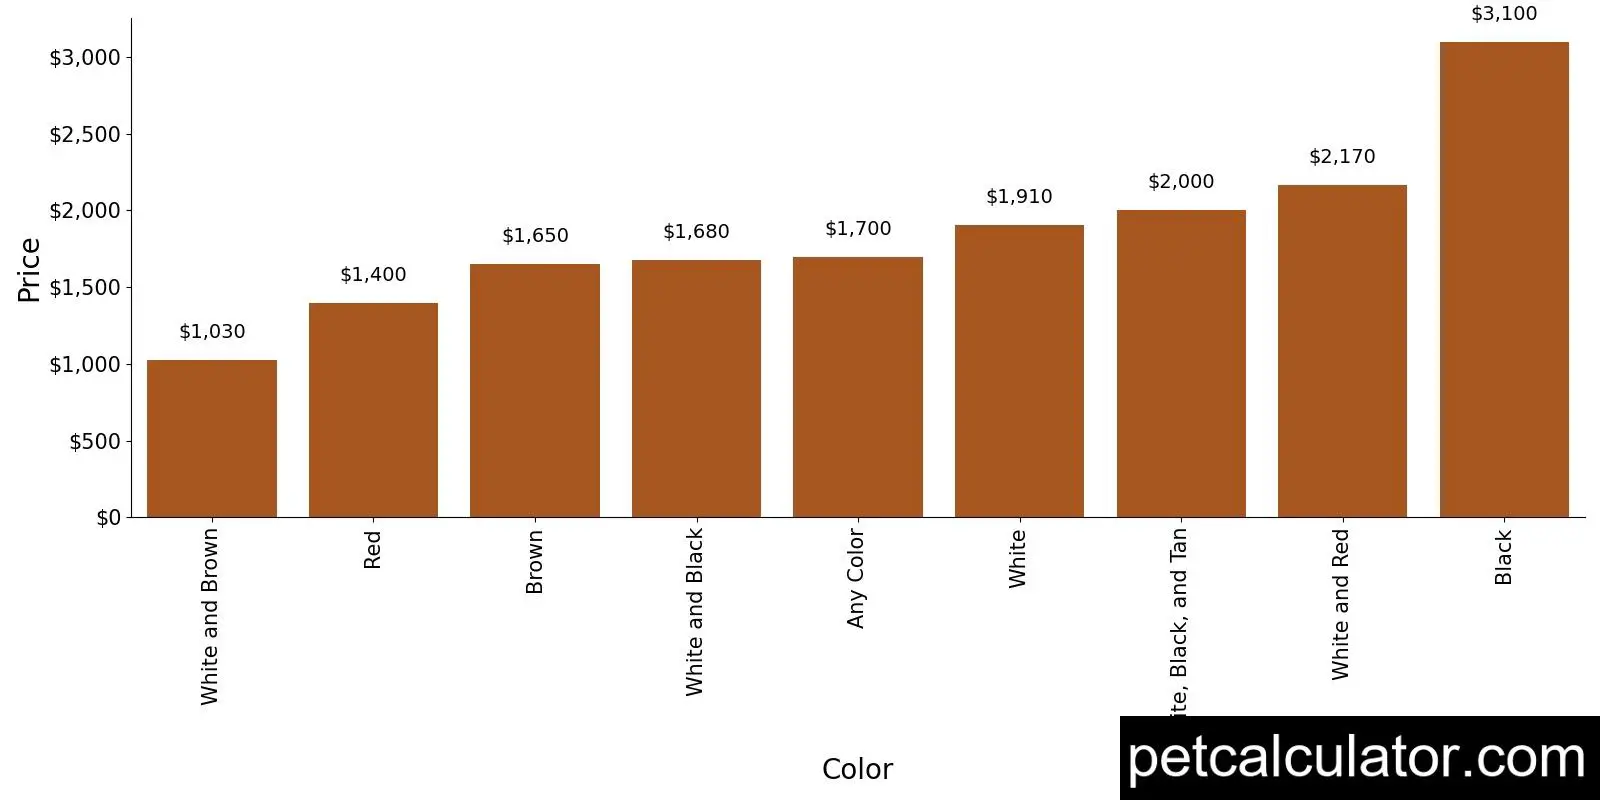 Price of Papillon by Color 